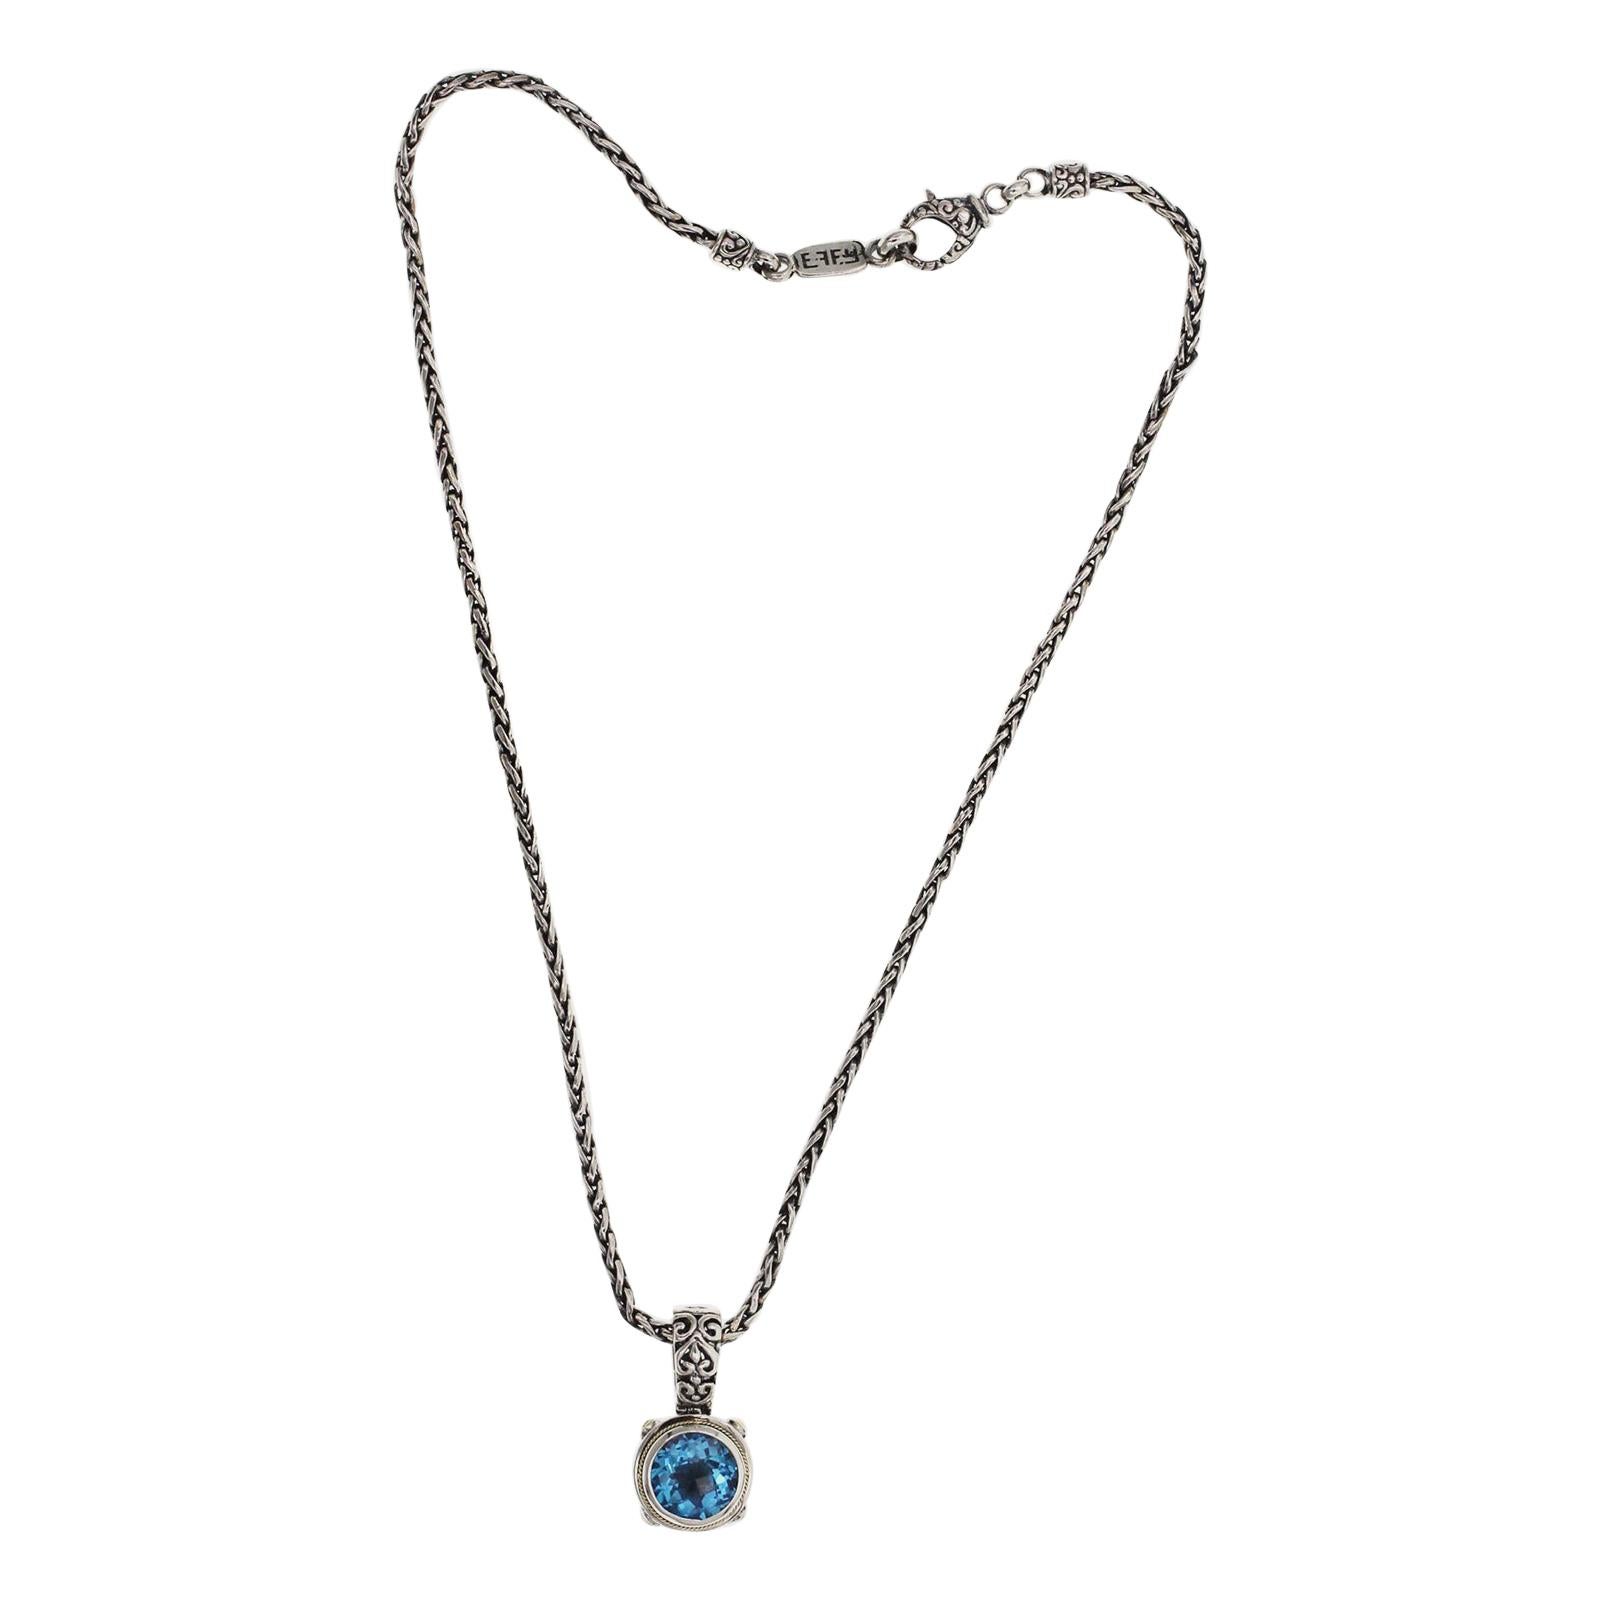 Effy Sterling Silver Curb Chain Necklace